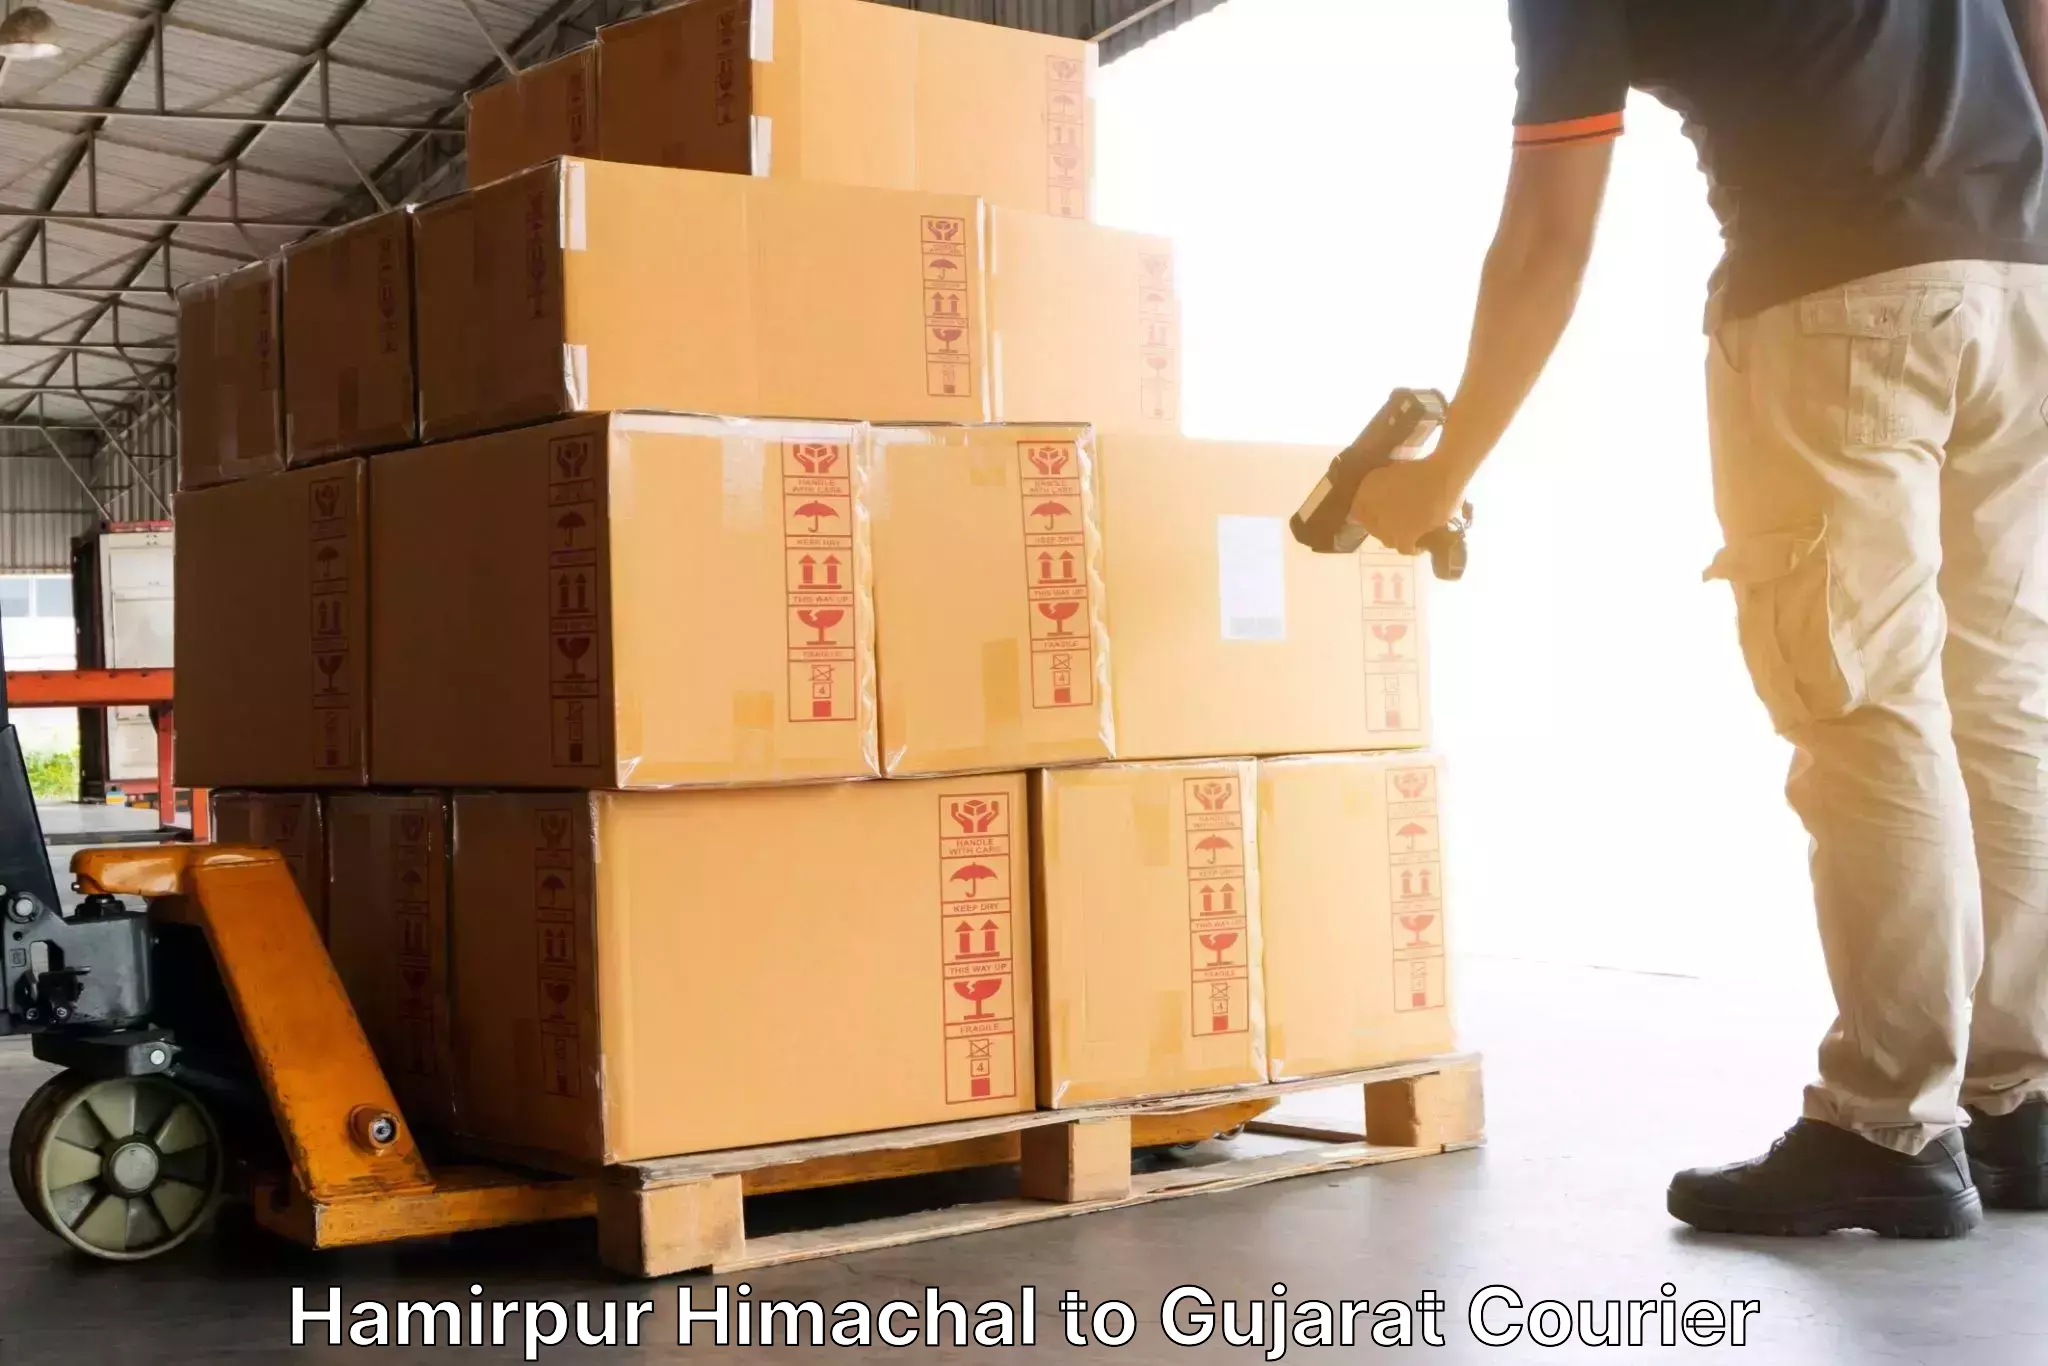 Express delivery capabilities in Hamirpur Himachal to Banaskantha